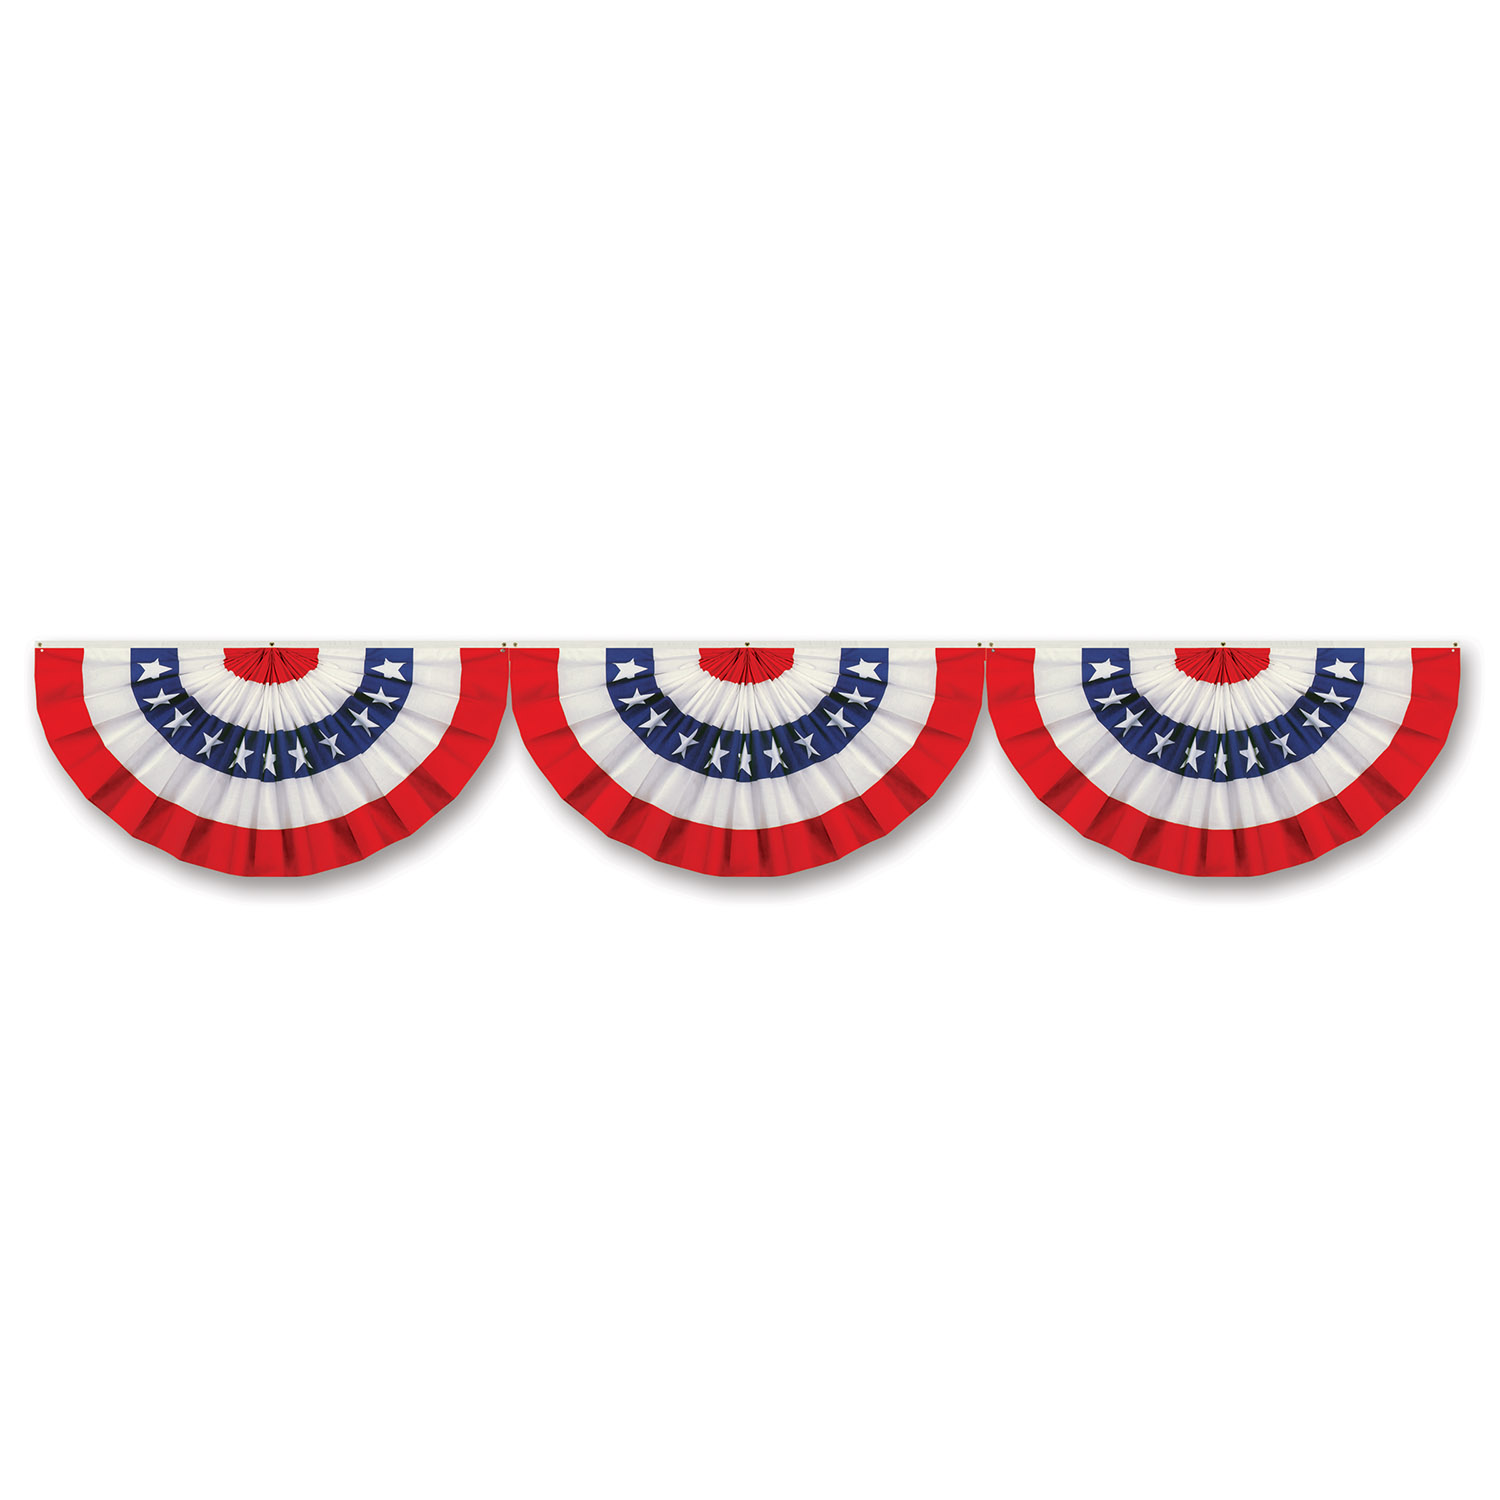 12 Pieces of Jointed Patriotic Bunting Cutout